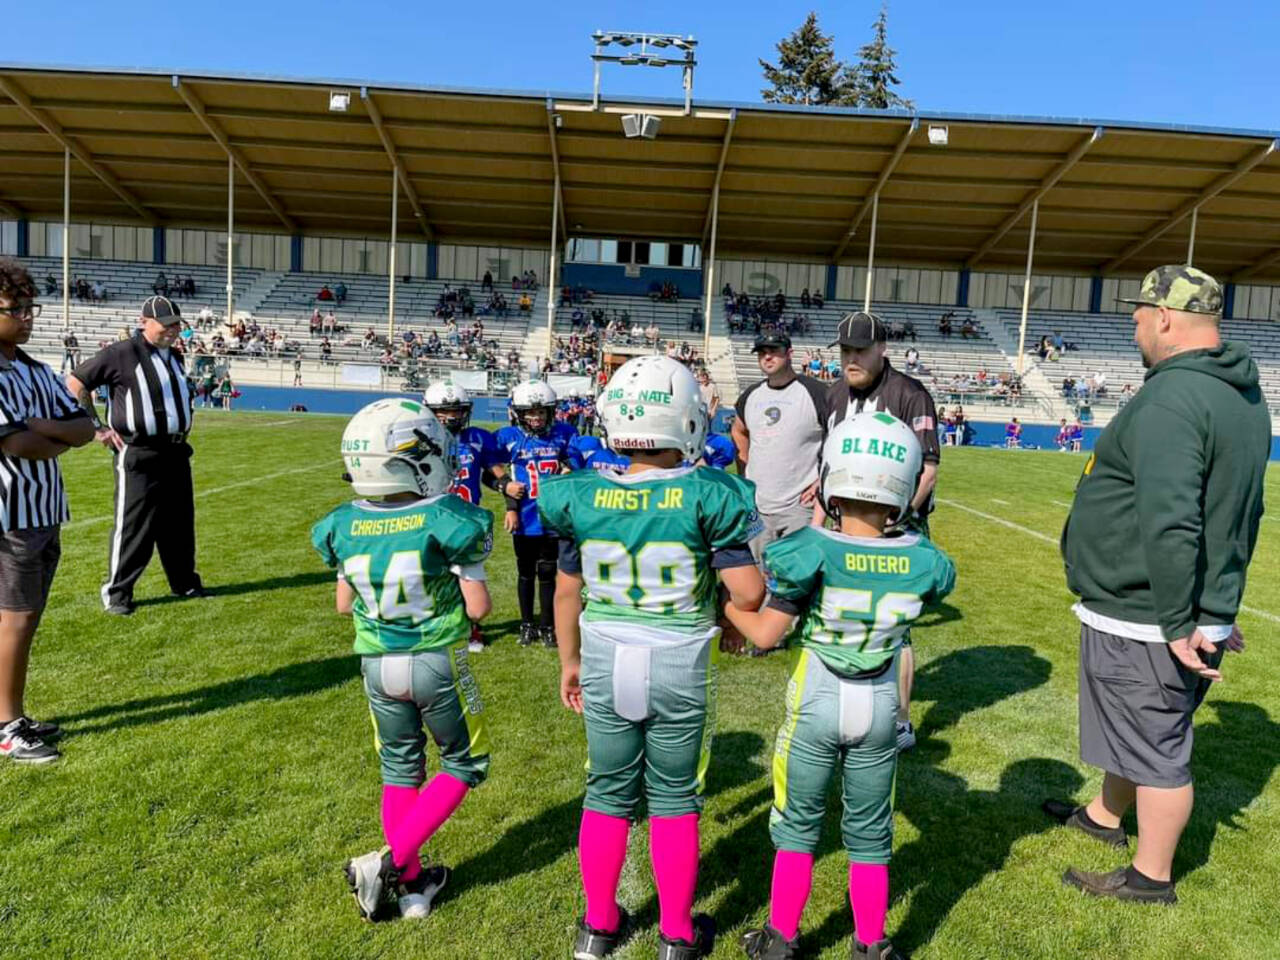 From left, Trust Christianson, Nate Hirst Jr. and Blake Botero wait on the sidelines during the Future Riders Green C team's 44-14 win Saturday at Civic Field. (Courtesy photo)